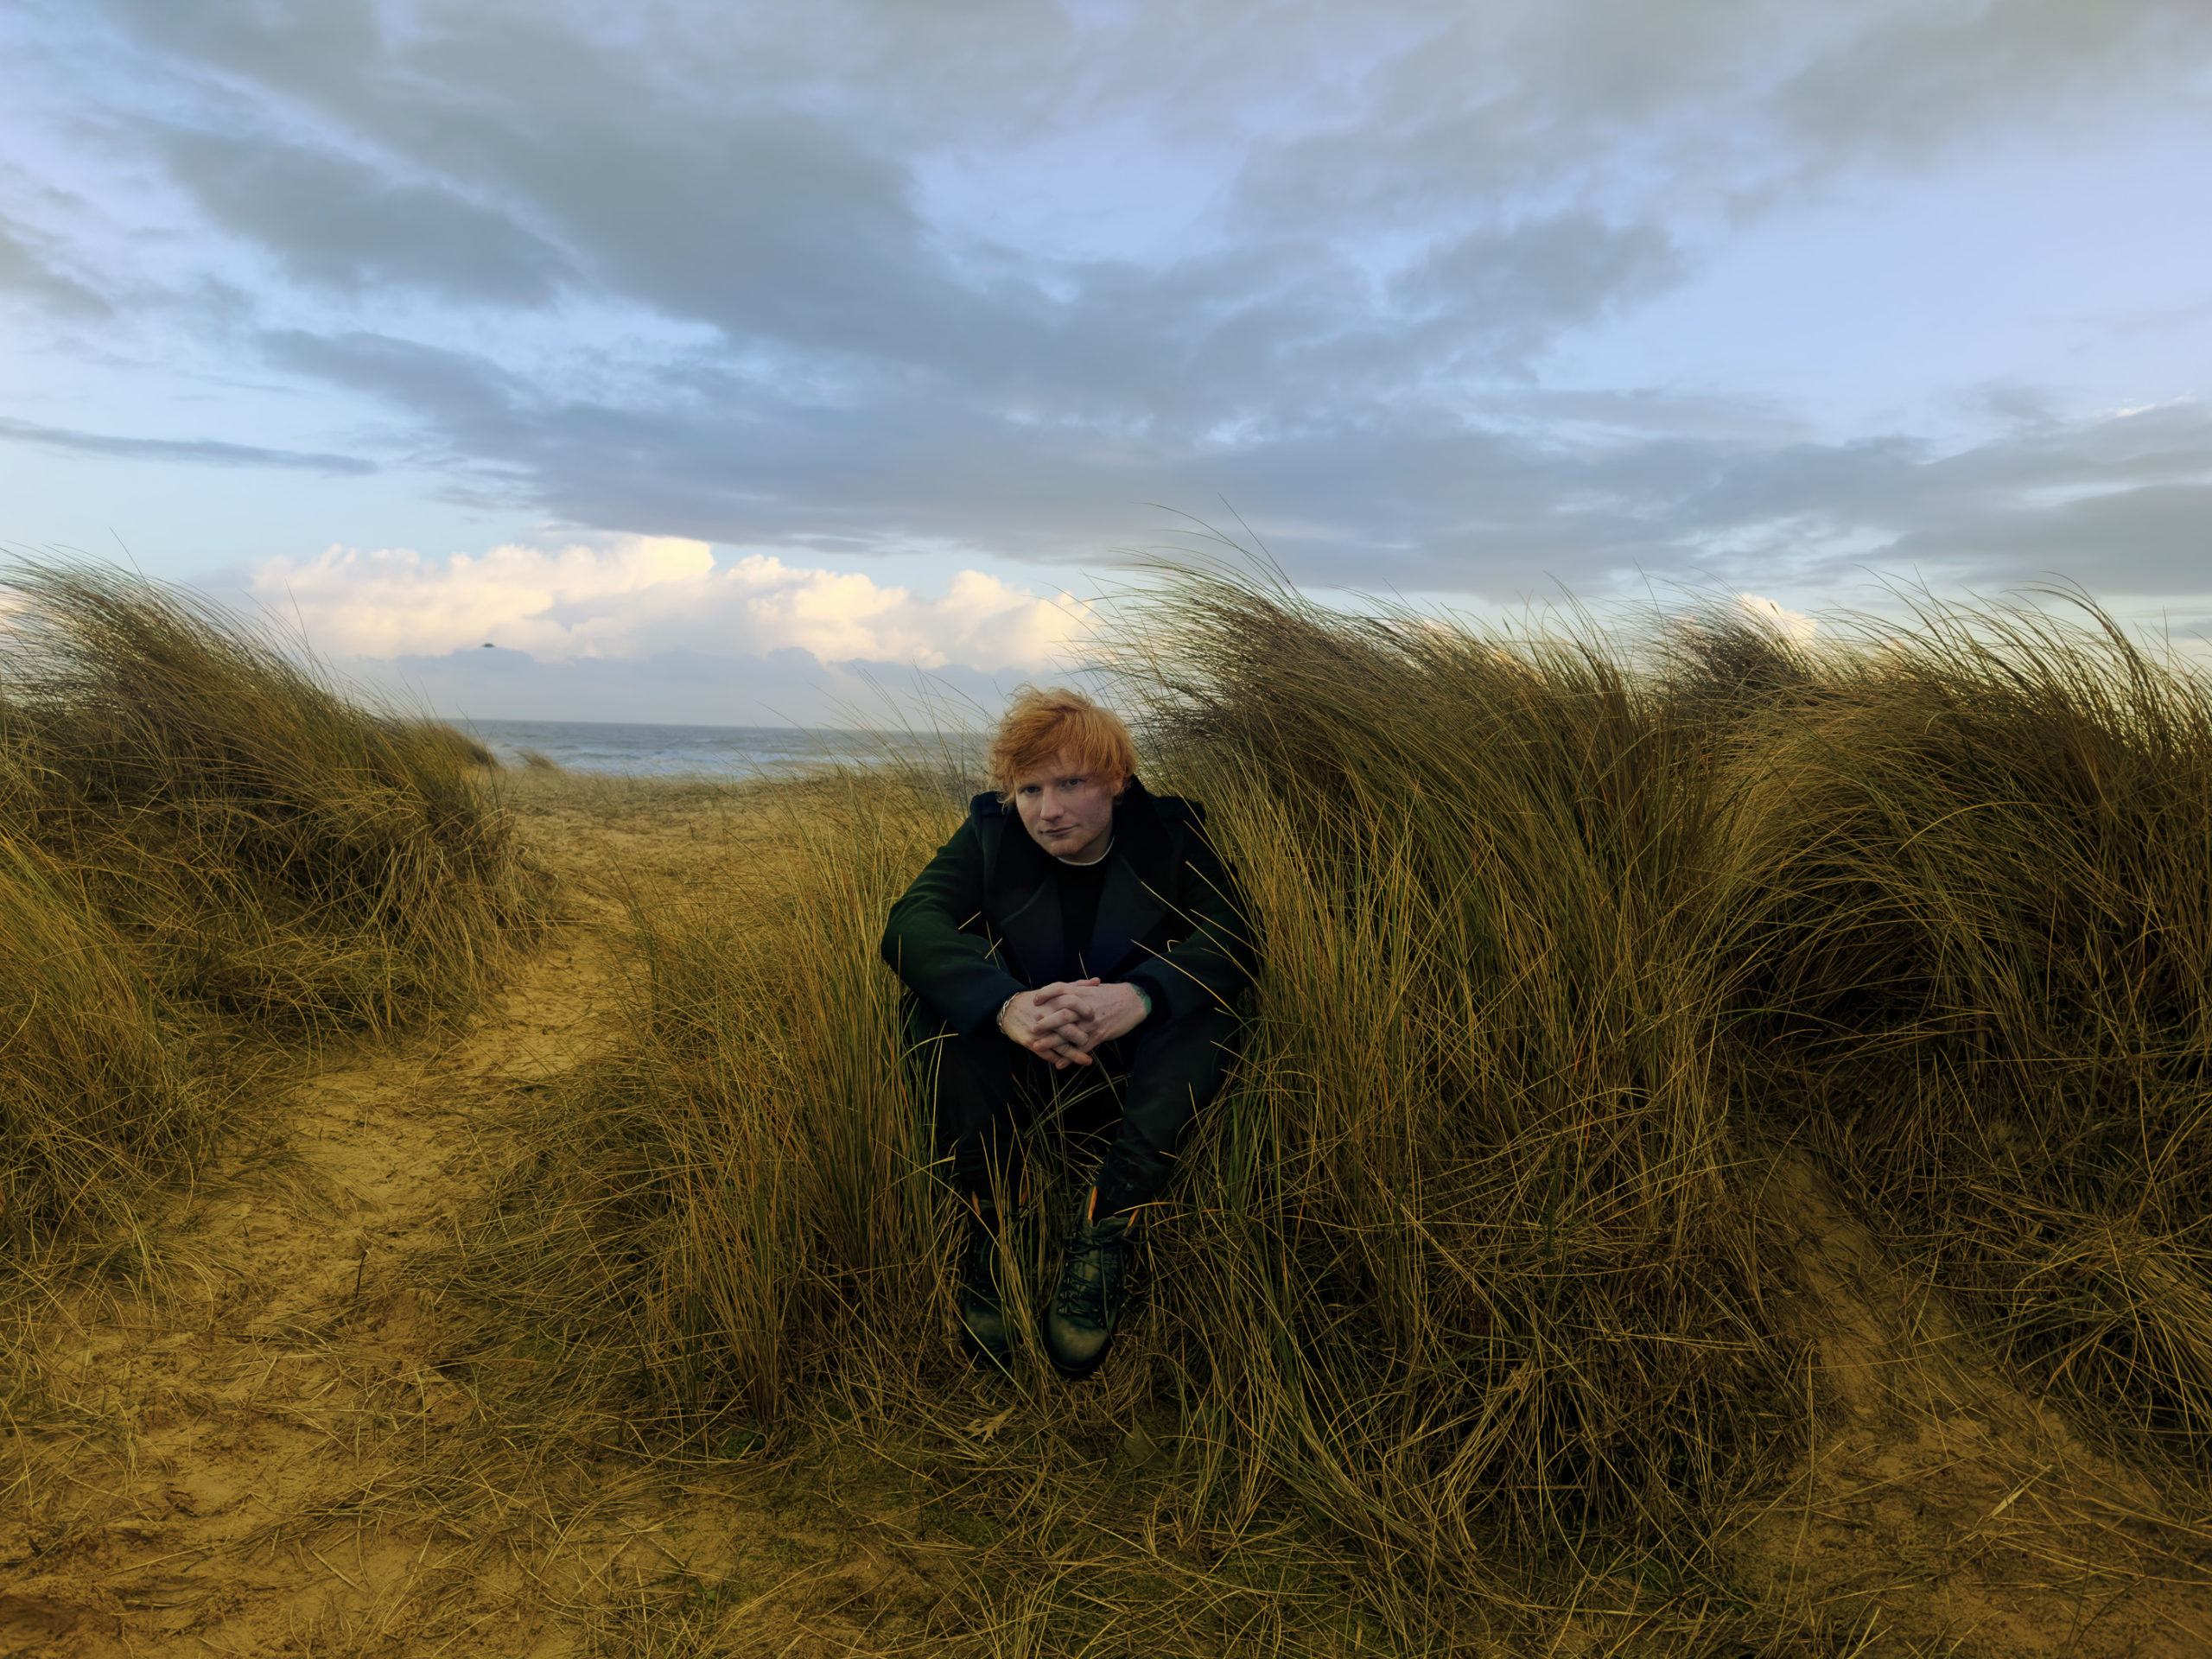 Ed Sheeran shares video moments from a fan-created series from his ‘Autumn Variations’ album.